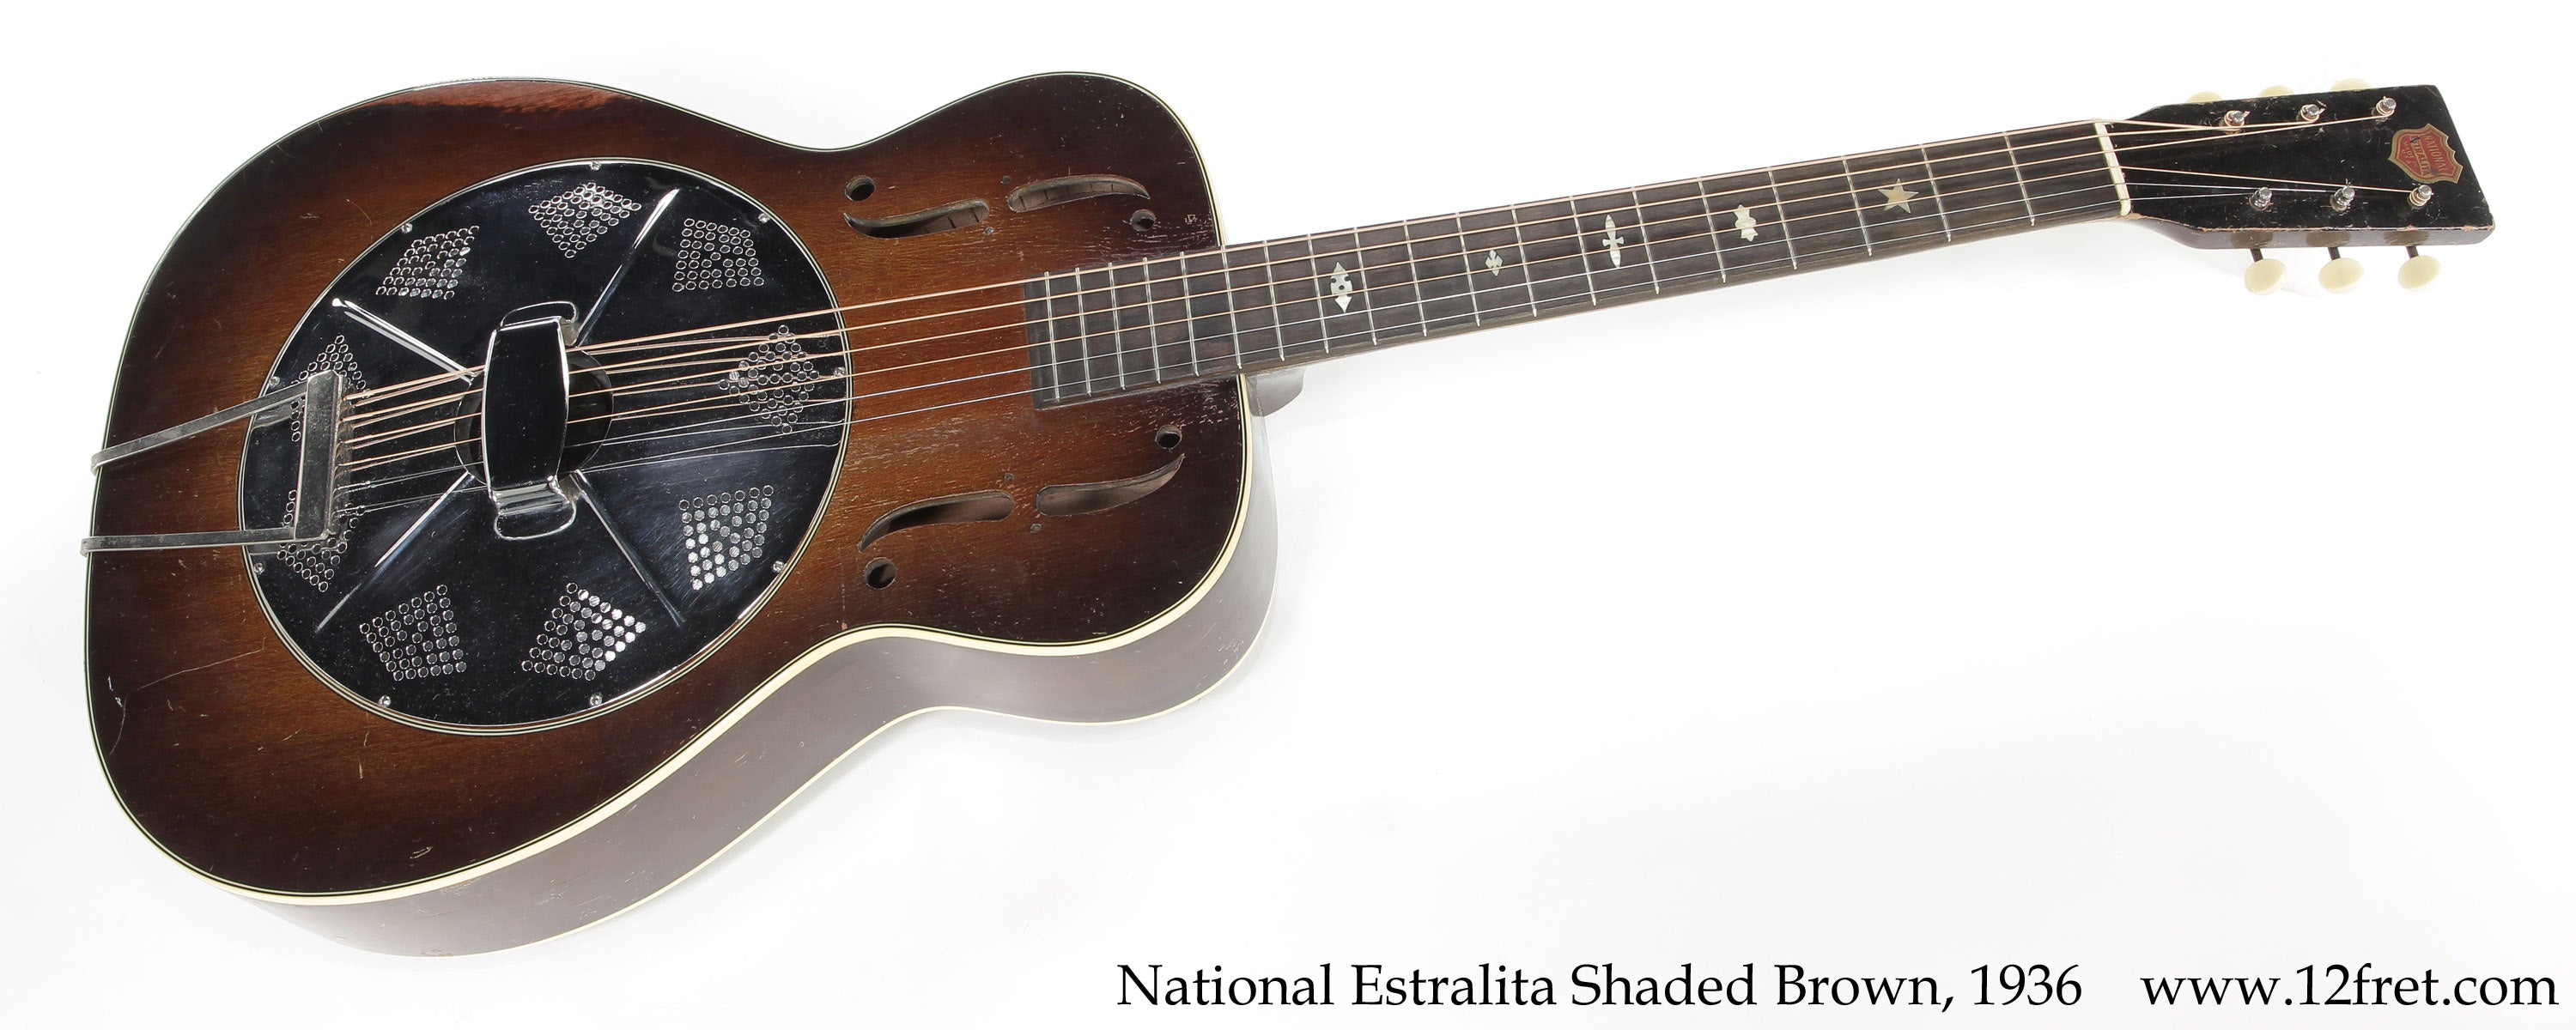 National Estralita Shaded Brown, 1936  - The Twelfth Fret